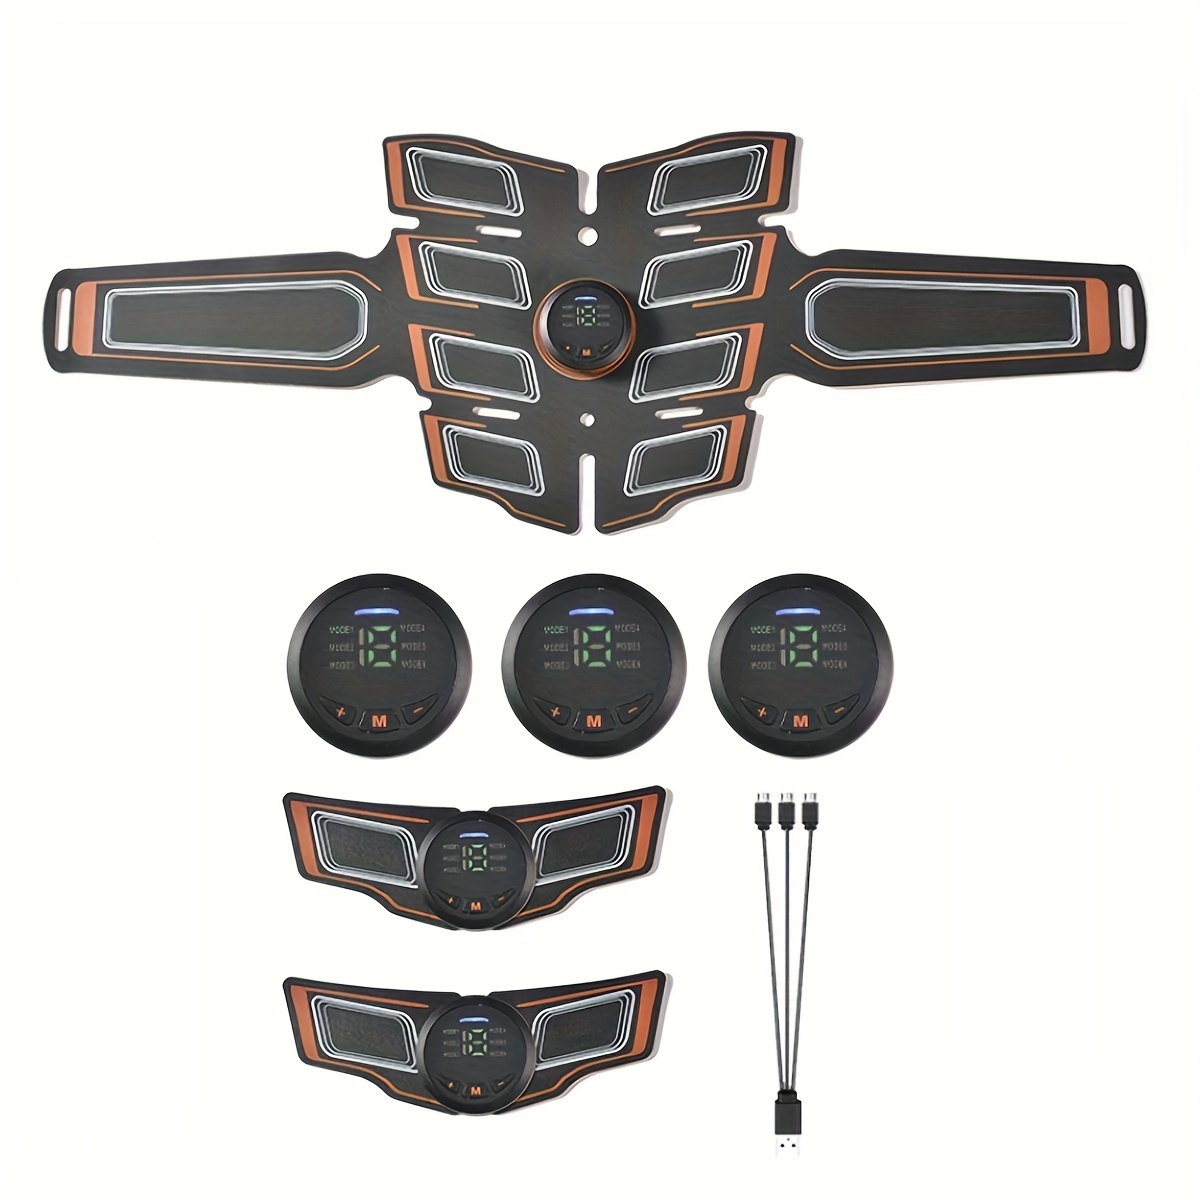 Companio Belts & Vibrators Tummy Toning Device, For Gym at Rs 9500